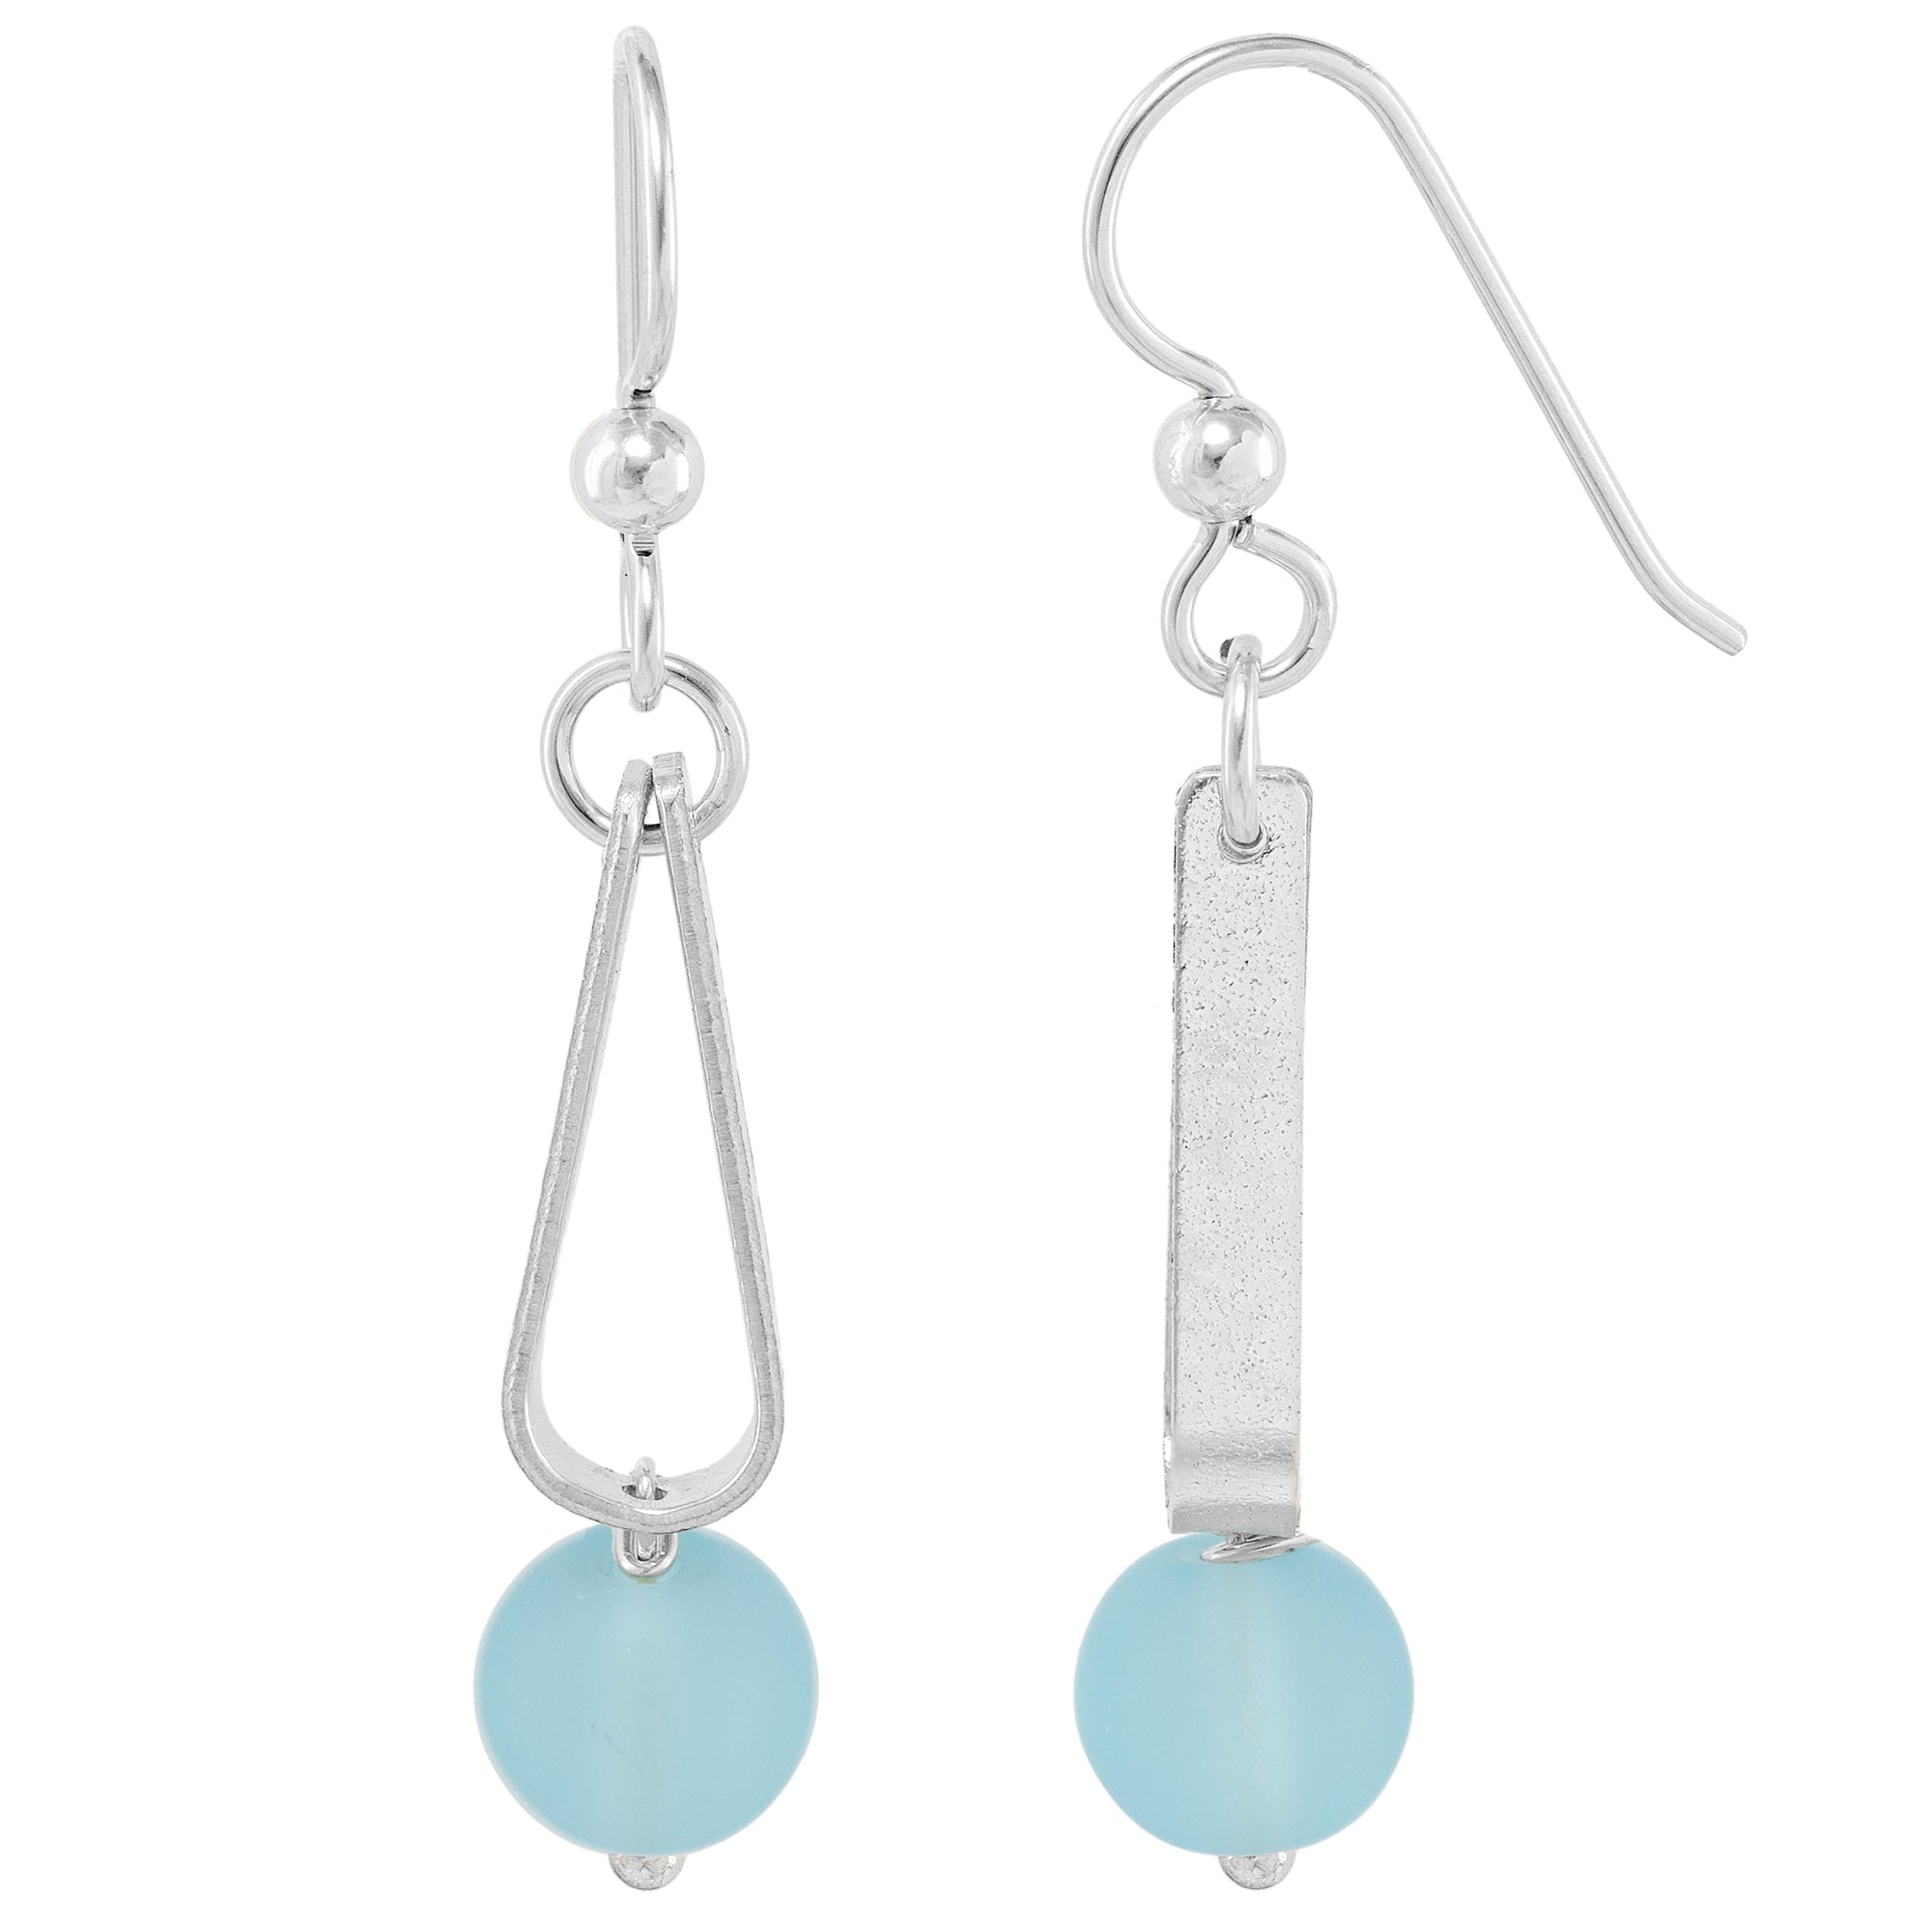 Light Baby Blue Round Recycled Glass Ball and Sterling Silver Teardrop Shaped Dangle Earrings